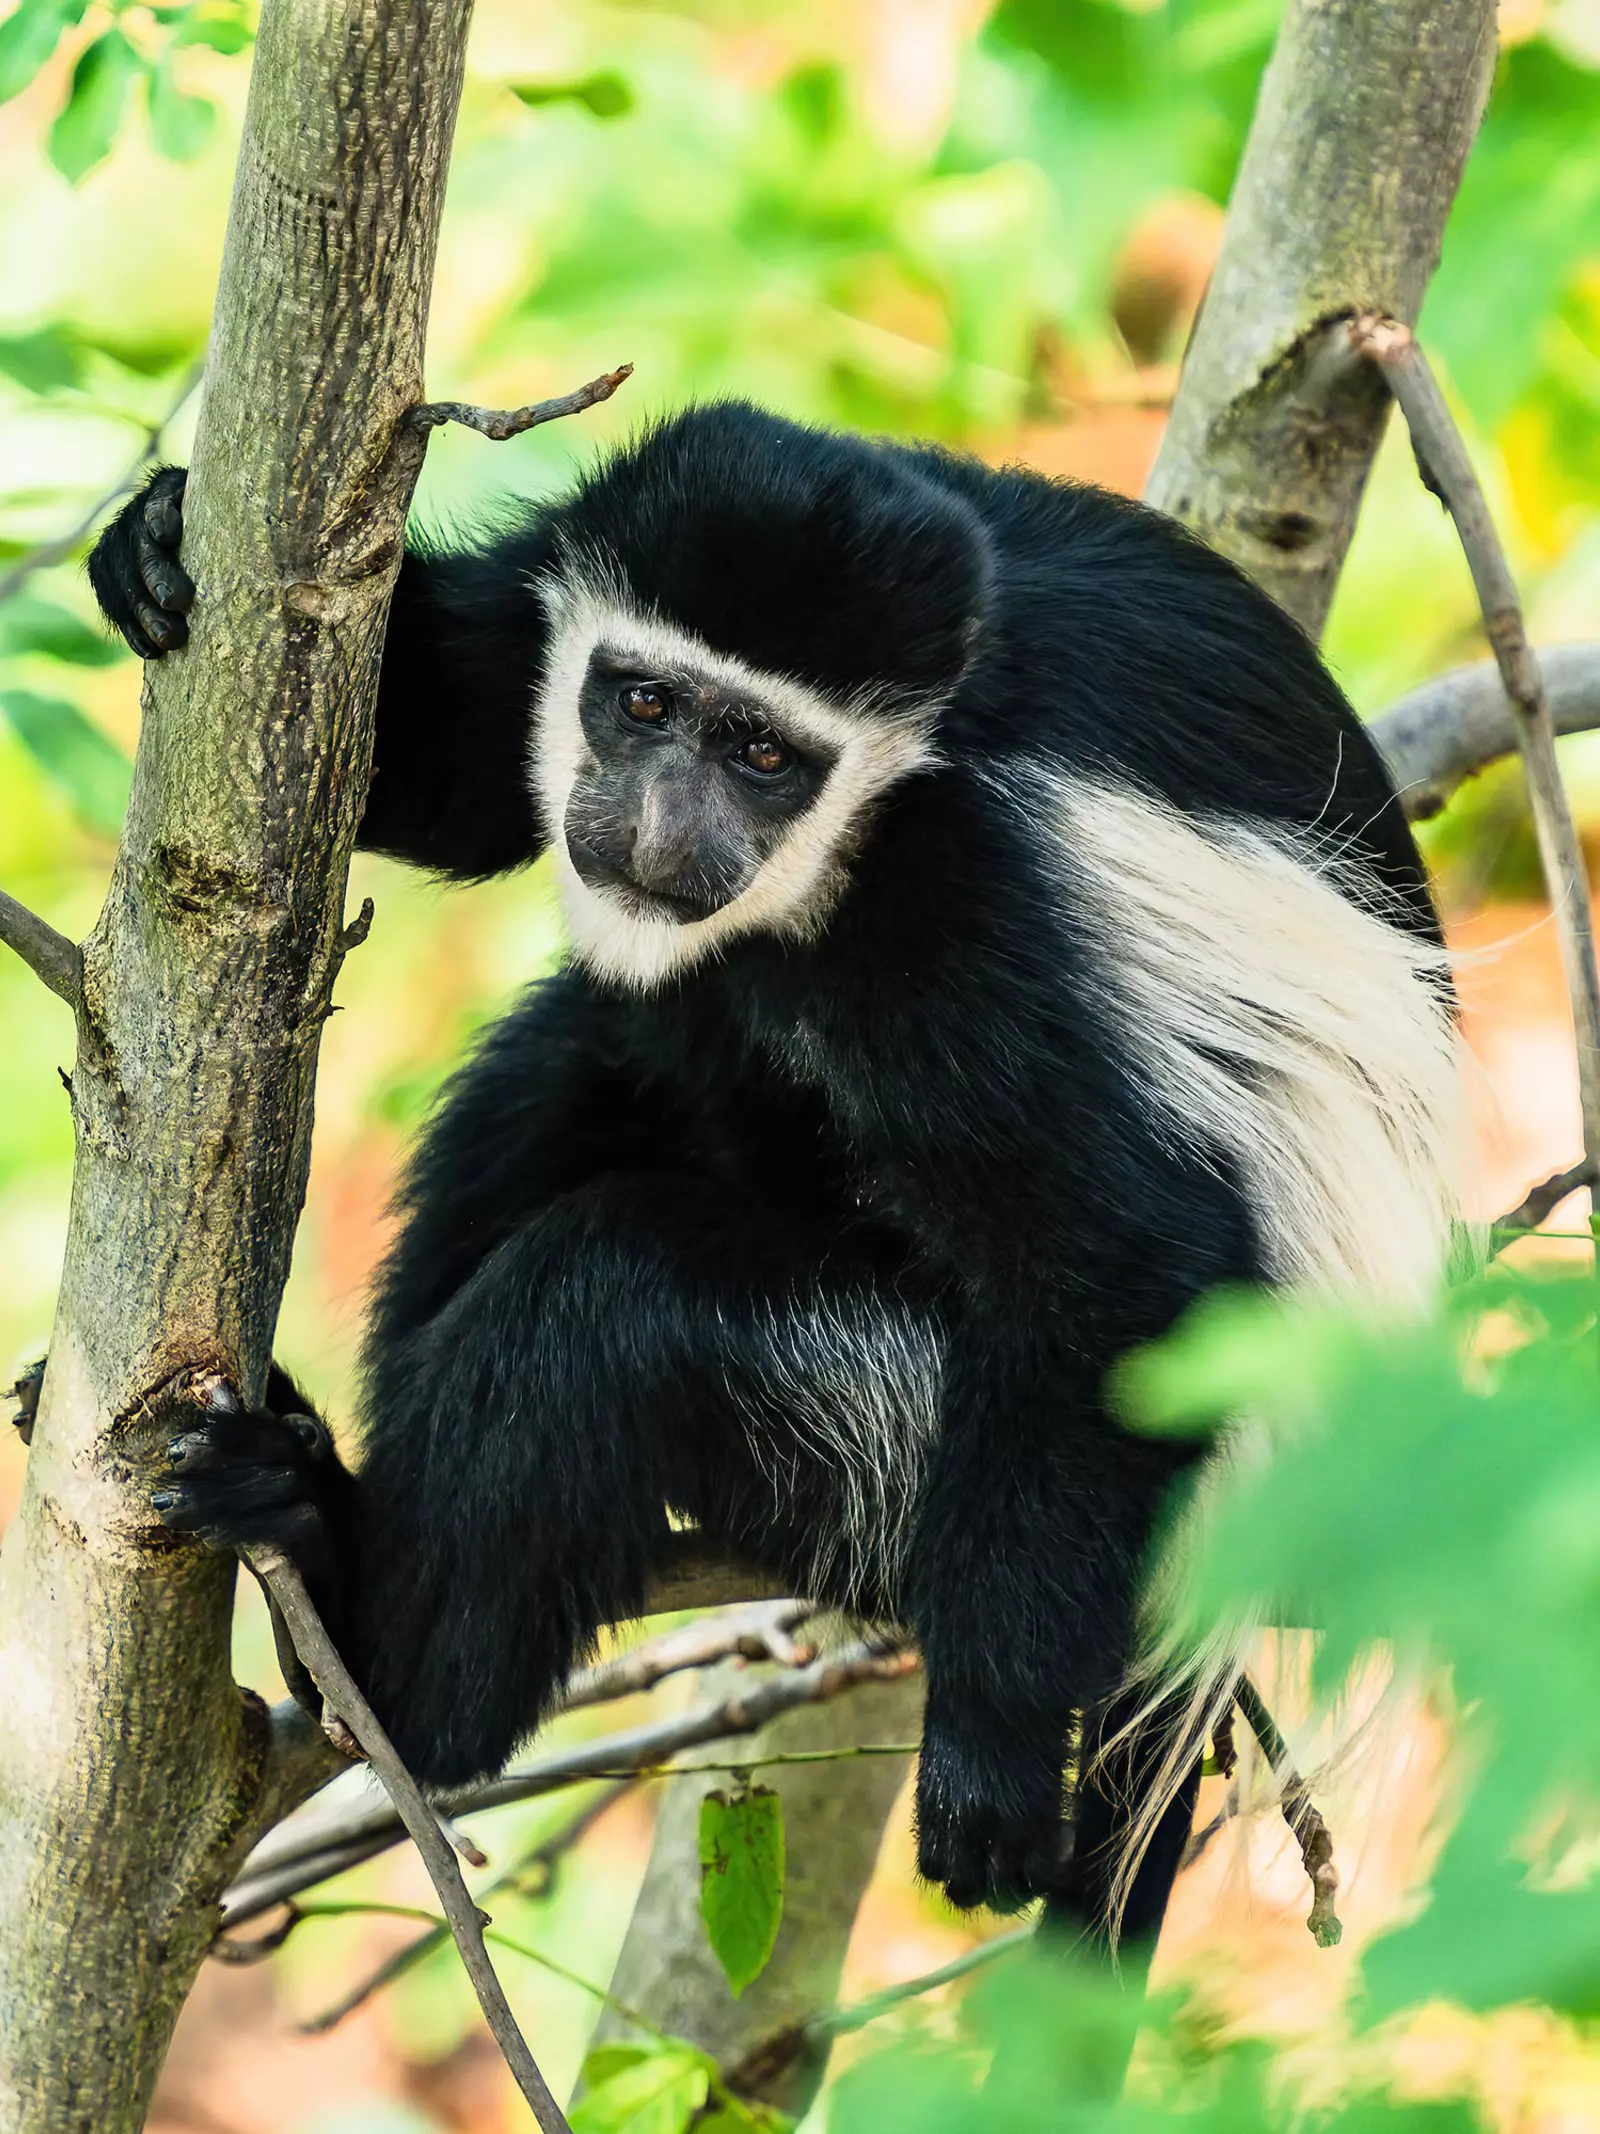 Eastern black-and-white colobus monkey in a tree at London Zoo